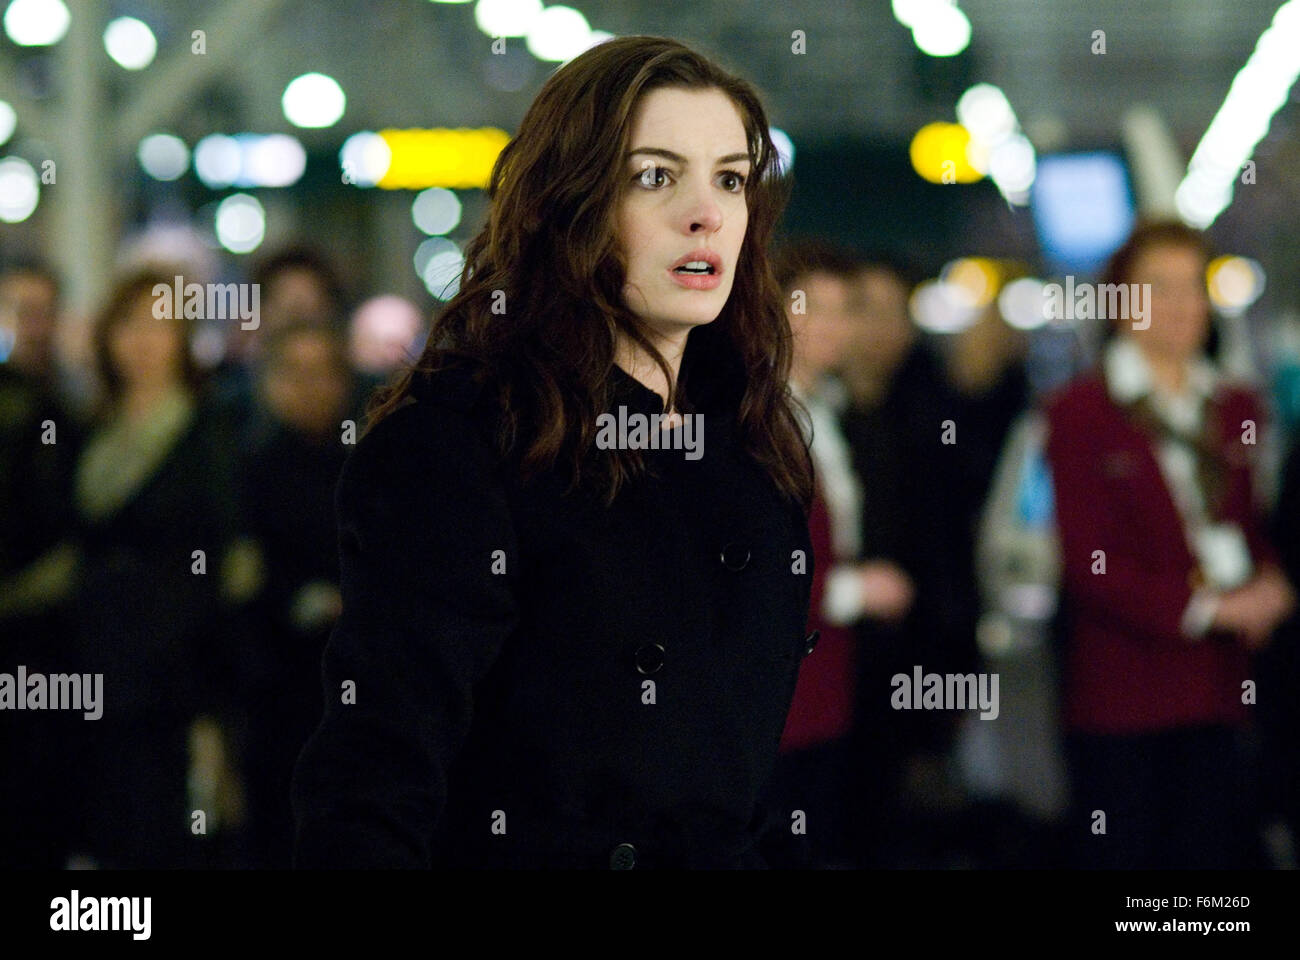 RELEASE DATE: September 5, 2008. MOVIE TITLE: Passengers. STUDIO: Columbia  Pictures. PLOT: A grief counselor works with a plane crash survivor through  his denial of the terrible event. PICTURED: ANNE HATHAWAY as